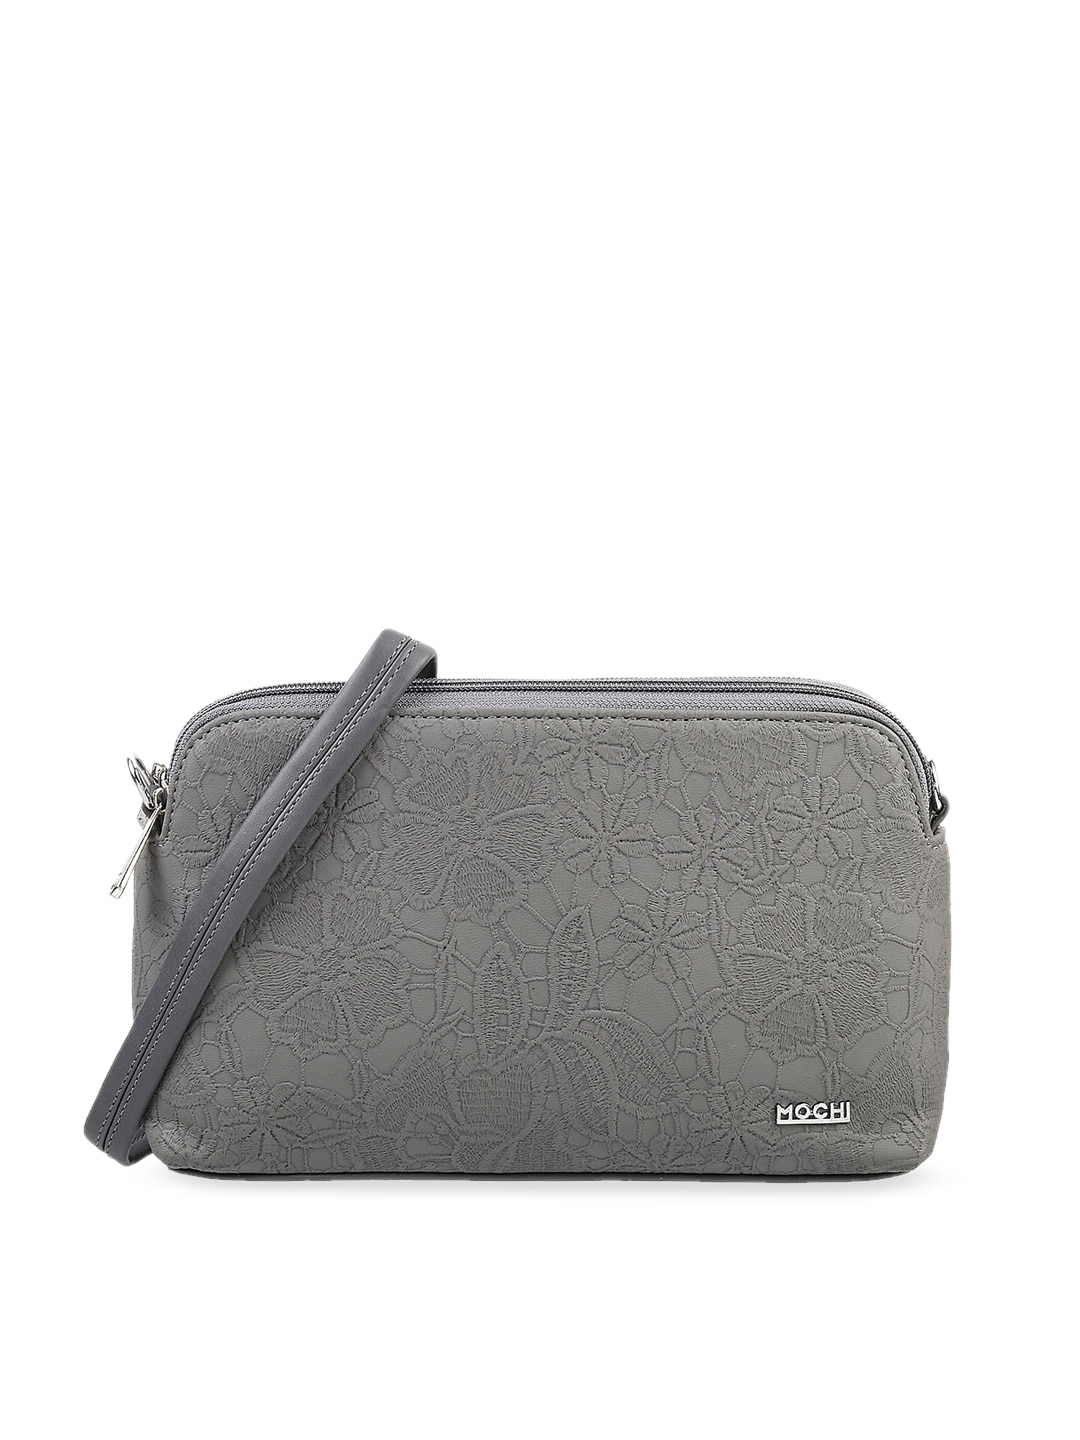 Mochi Grey Textured Sling Bag Price in India